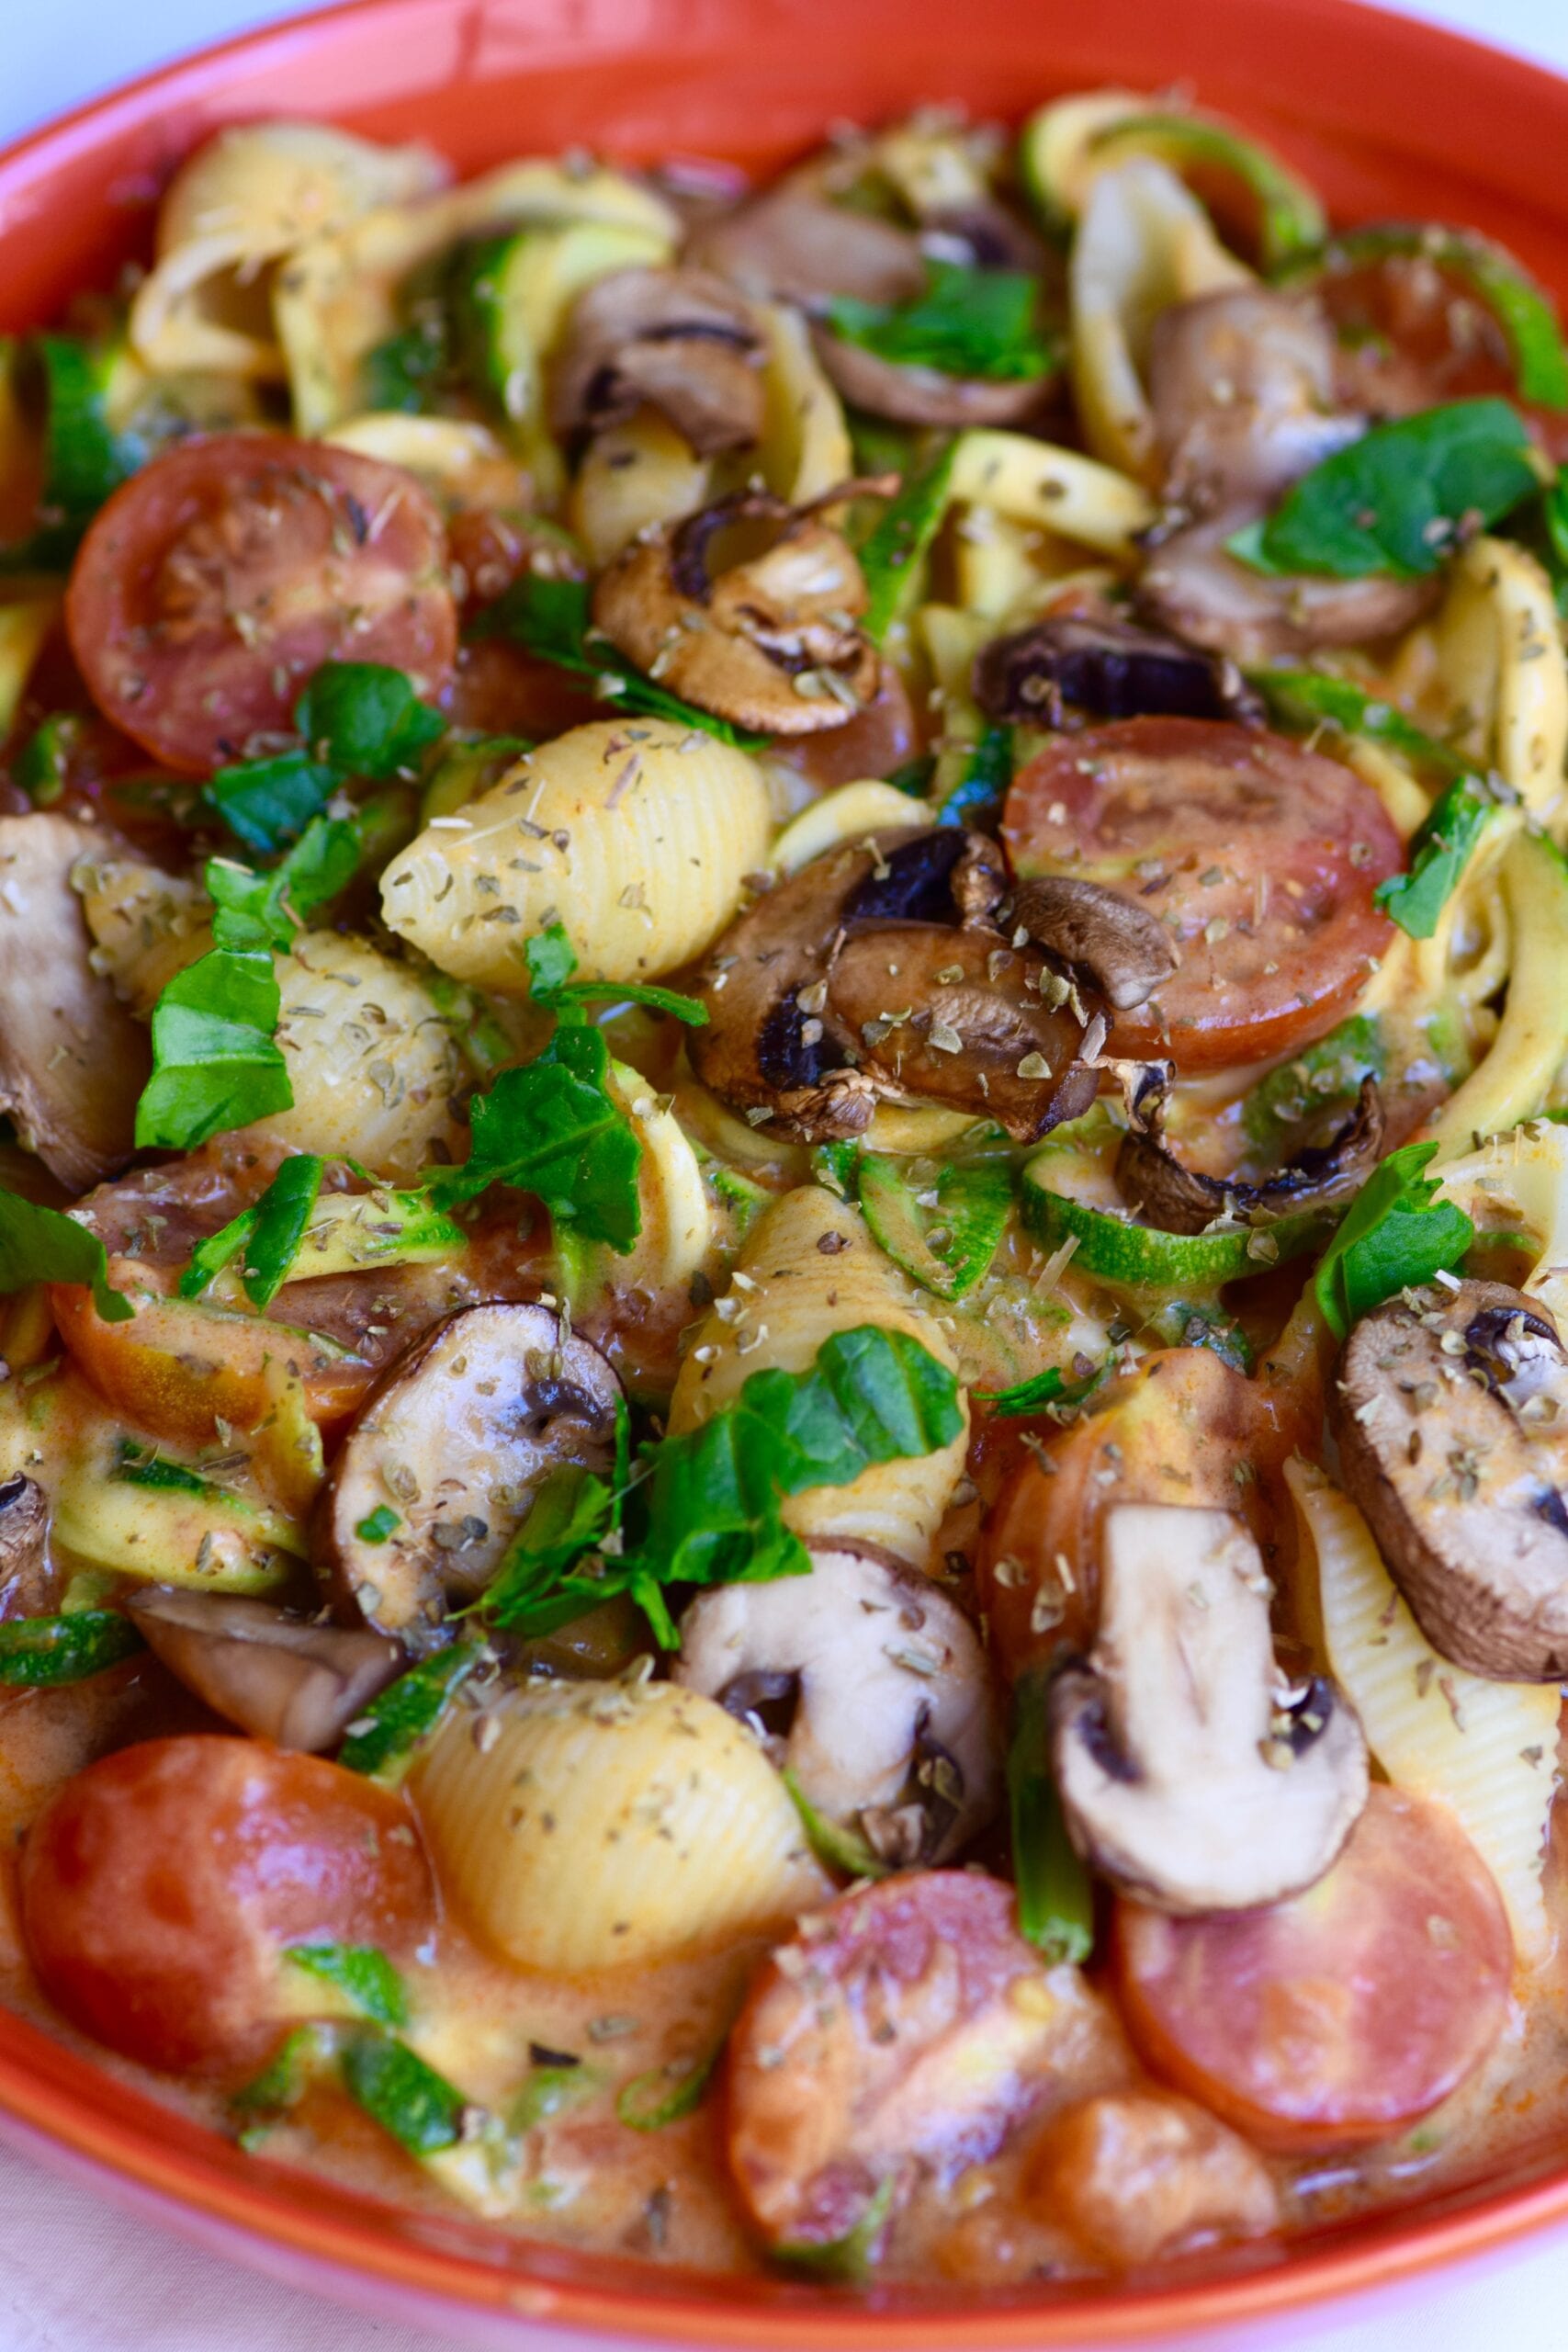 Low carb creamy tomato pasta with mushrooms, zucchini, tomatoes and basil